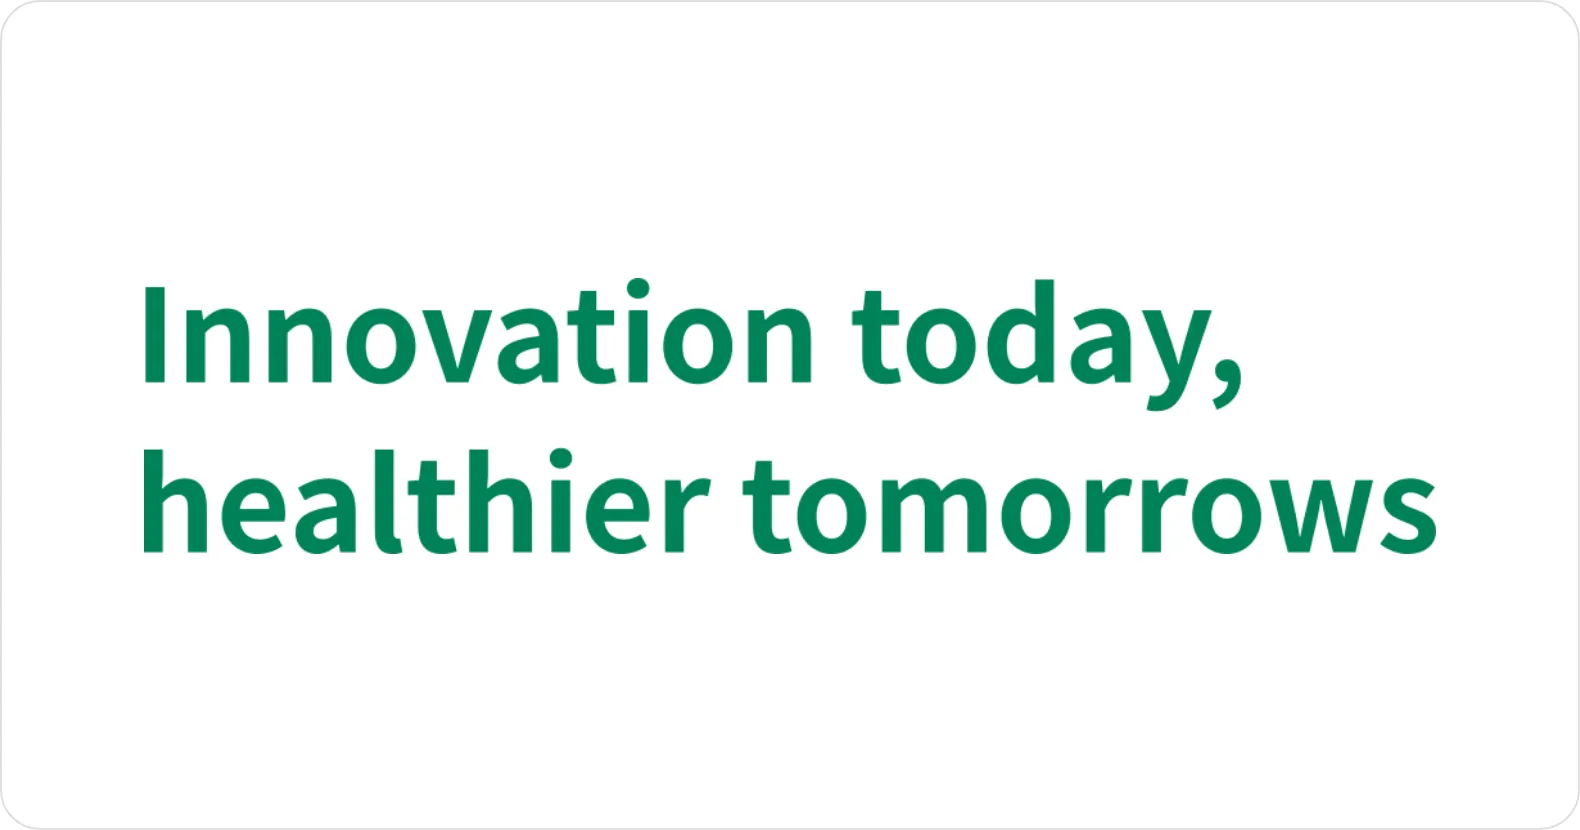 Innovation today,healthier tomorrows